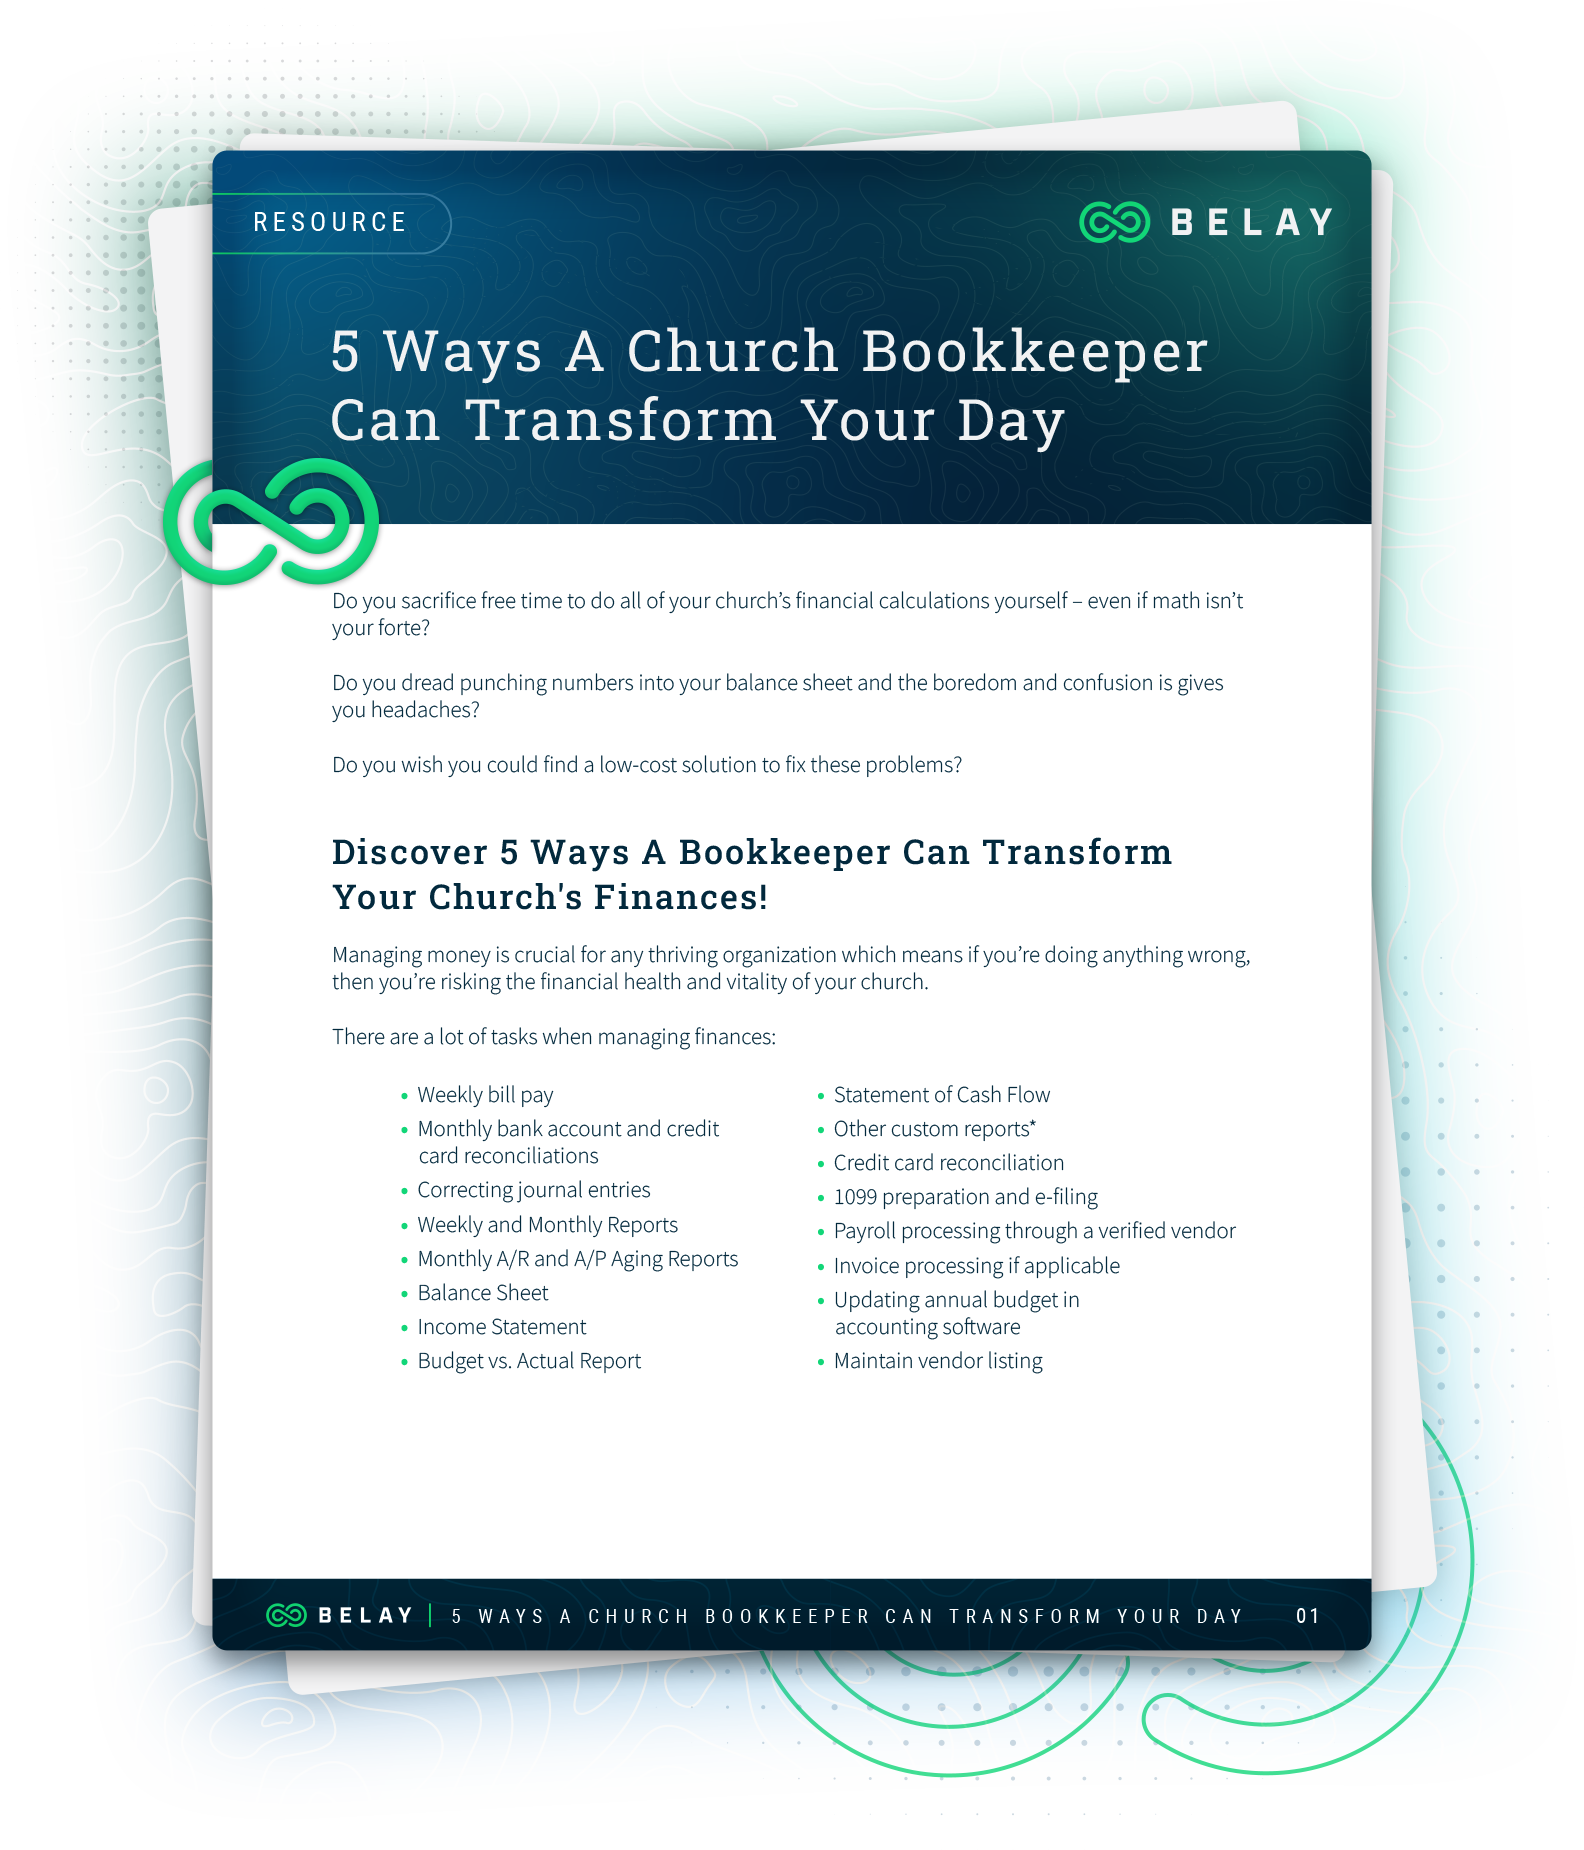 5 Ways A Church Bookkeeper Can Transform Your Day